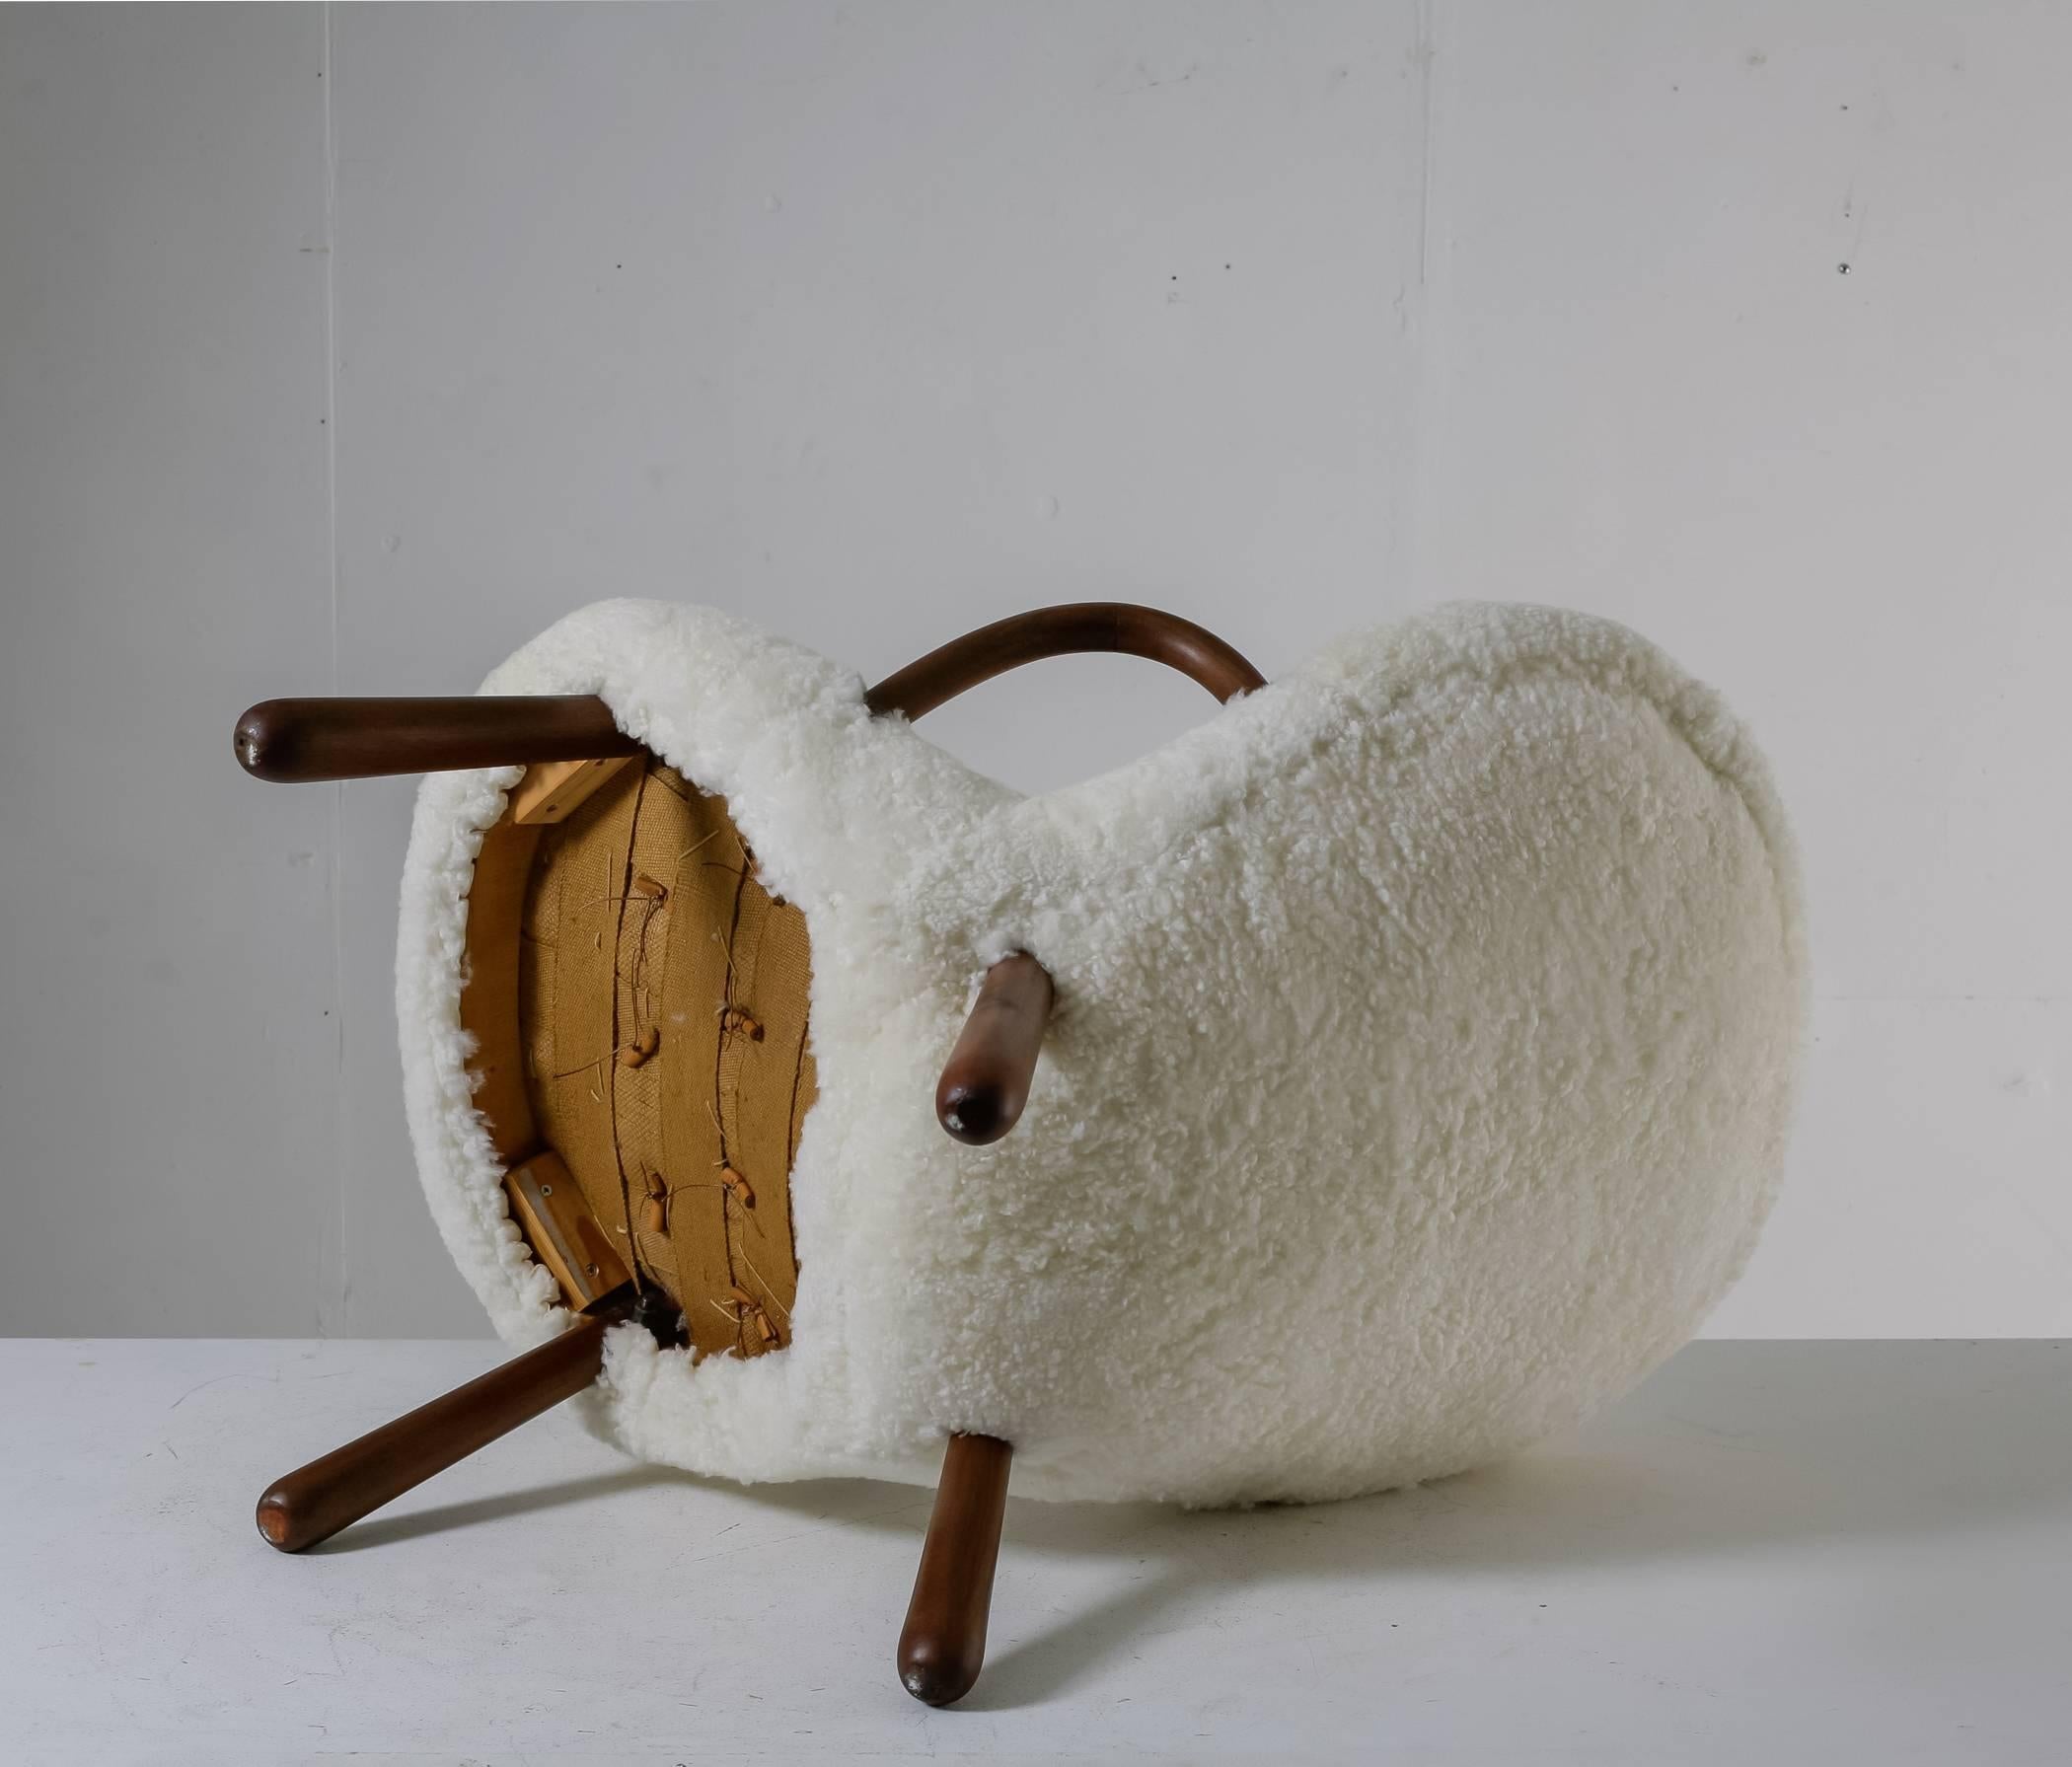 A Musling (clam) chair by Philip Arctander. The chair is made of a lacquered beech frame and a newly upholstered with a white sheep skin. The wooden armrests are molded and the legs are rounded, giving the chair an organic shape and the inspiration